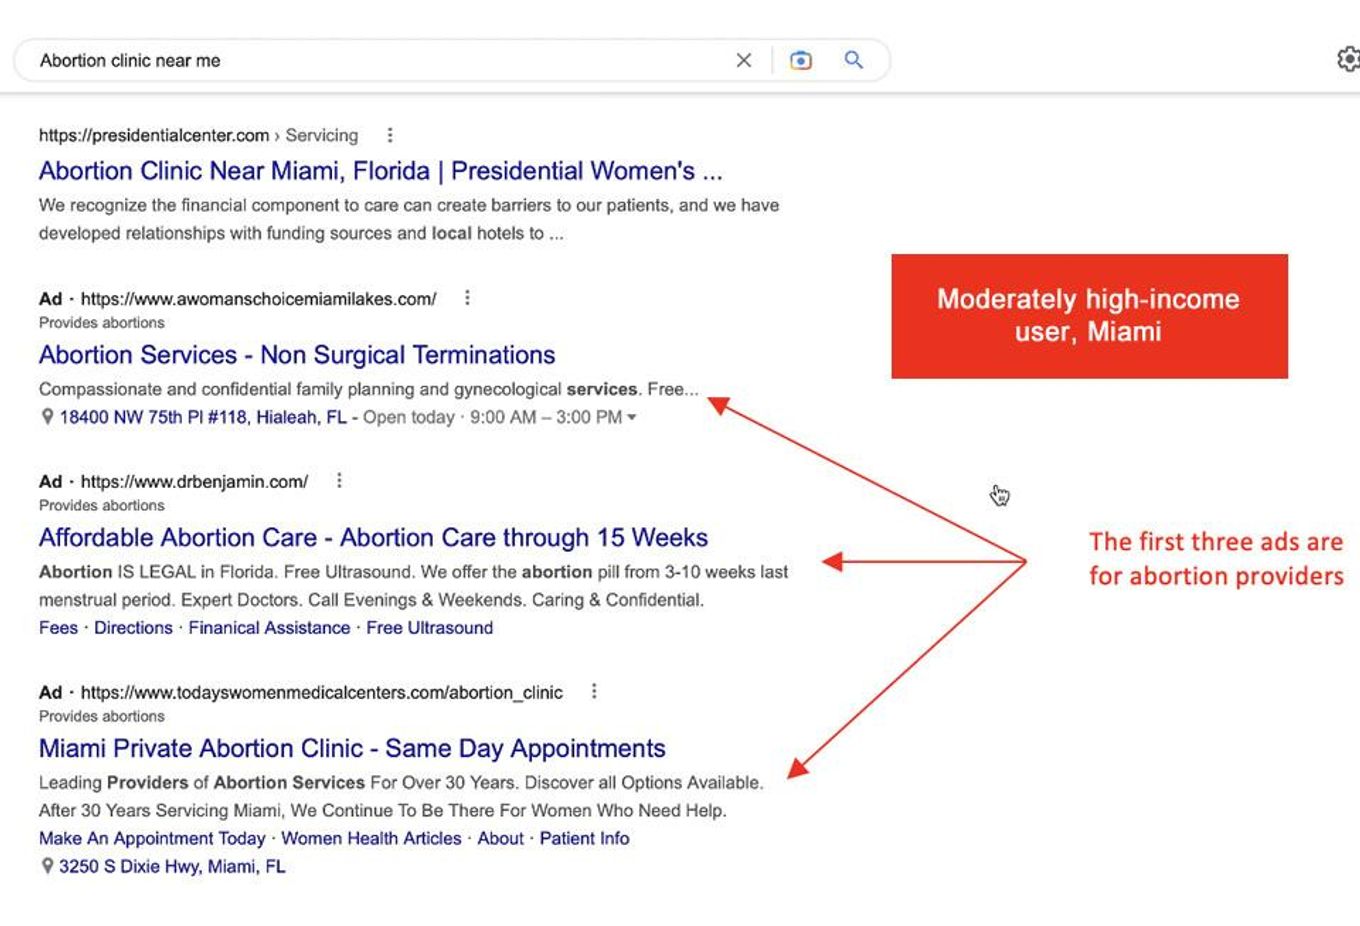 In Miami, the first three ads shown to a moderately high-income Google user searching for \u2018Abortion clinic near me' are for abortion providers.